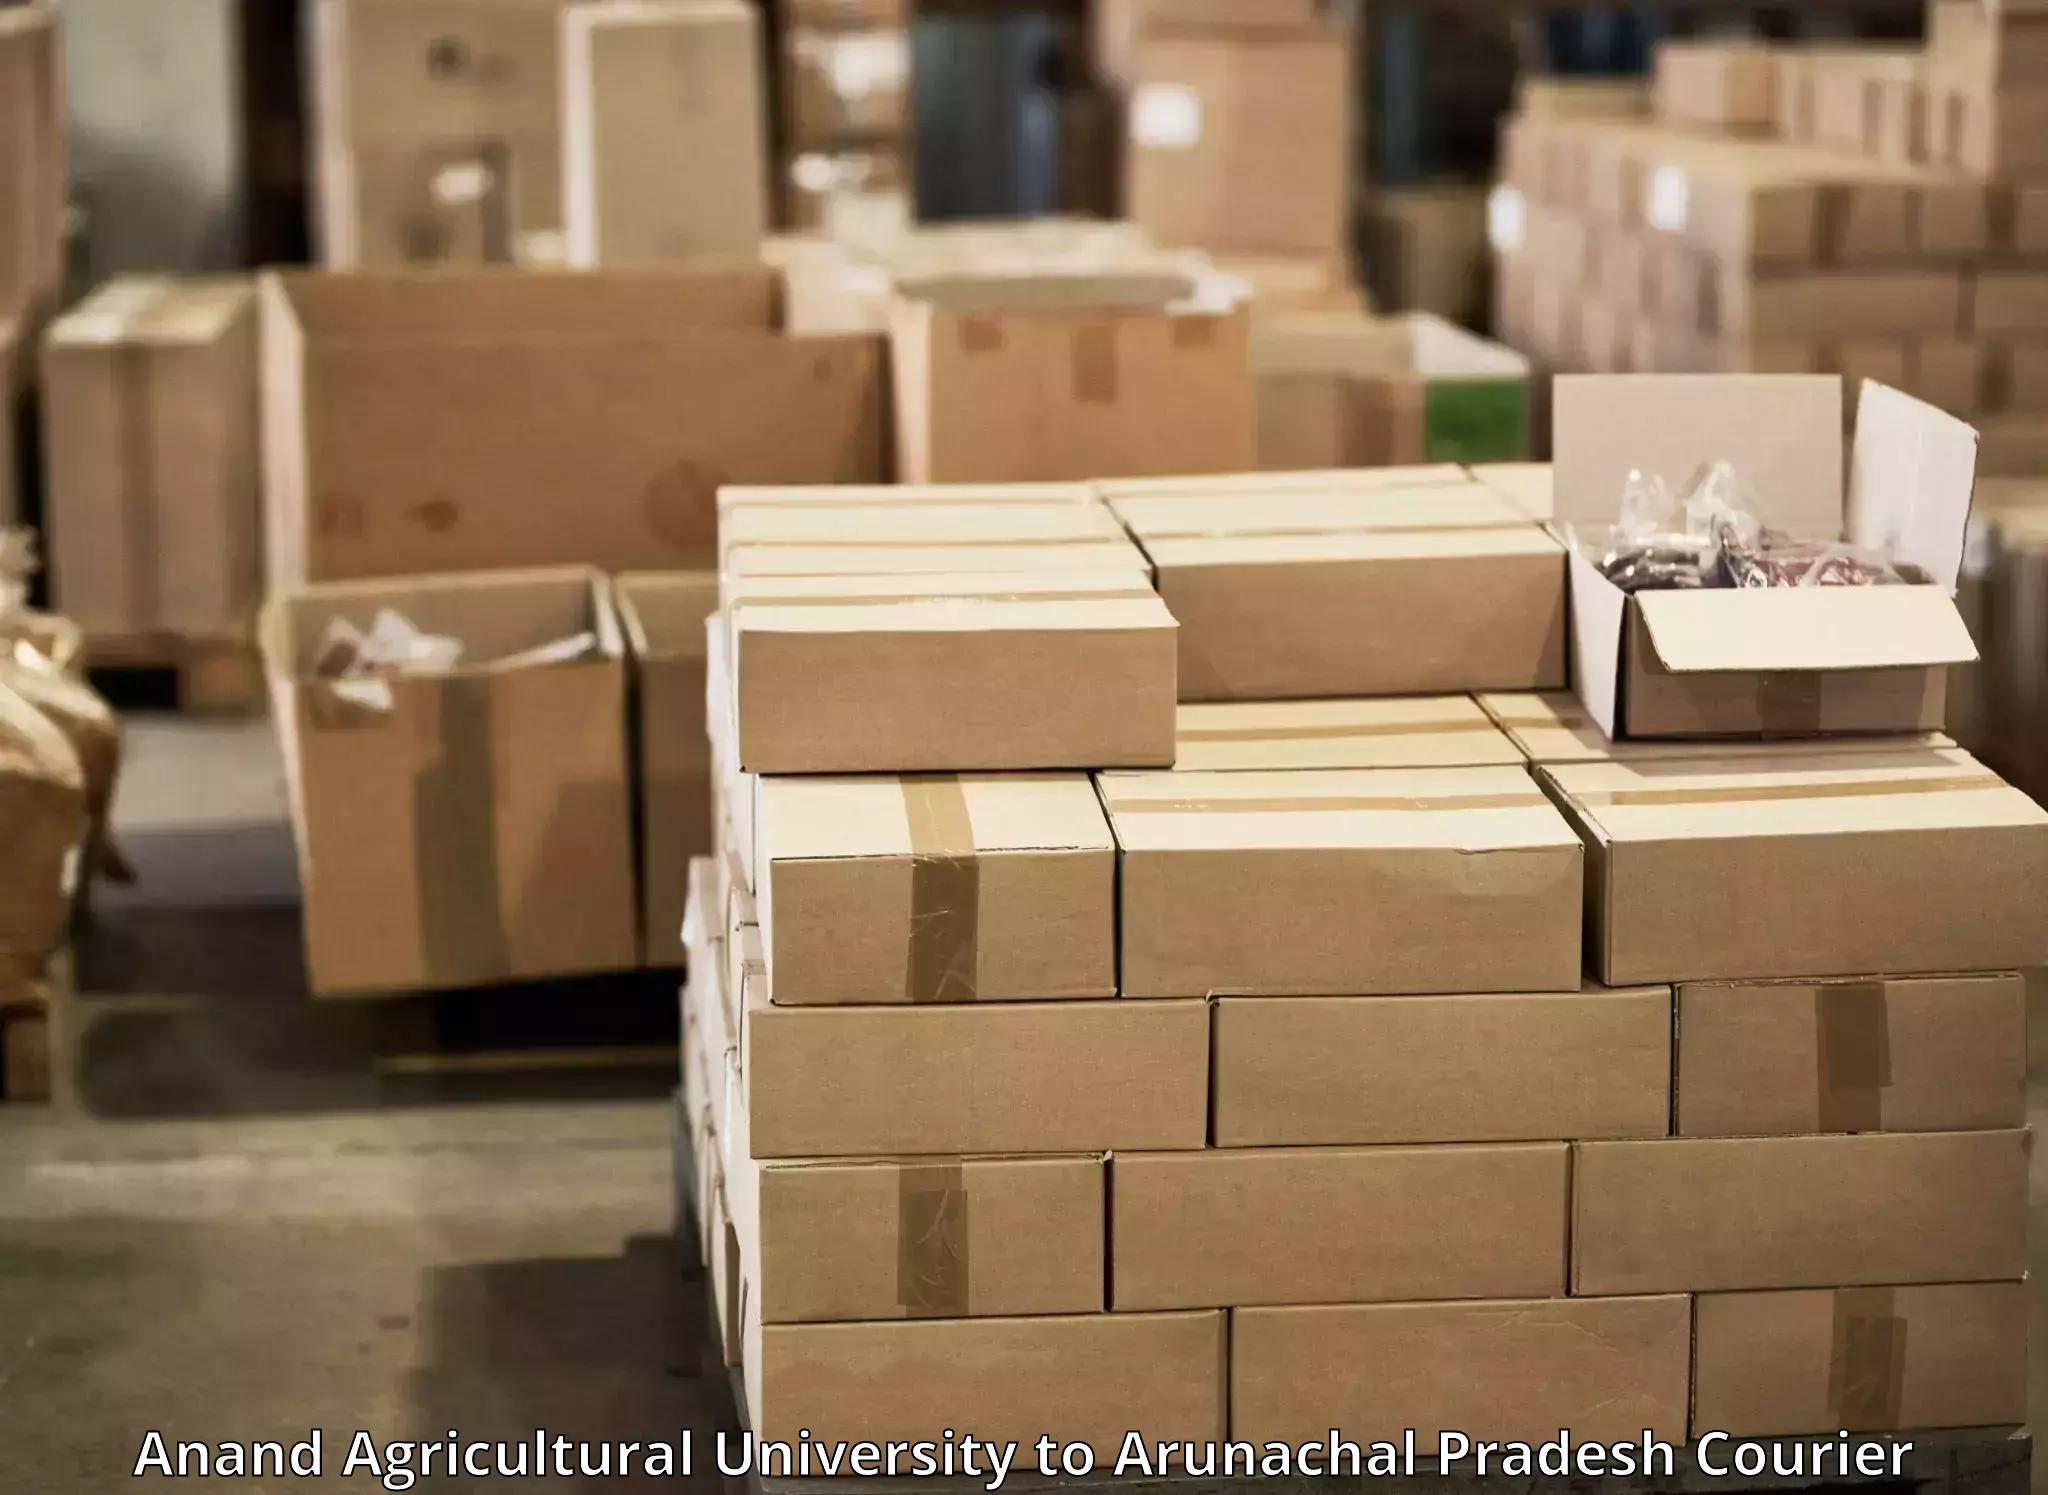 Affordable international shipping Anand Agricultural University to Bomdila